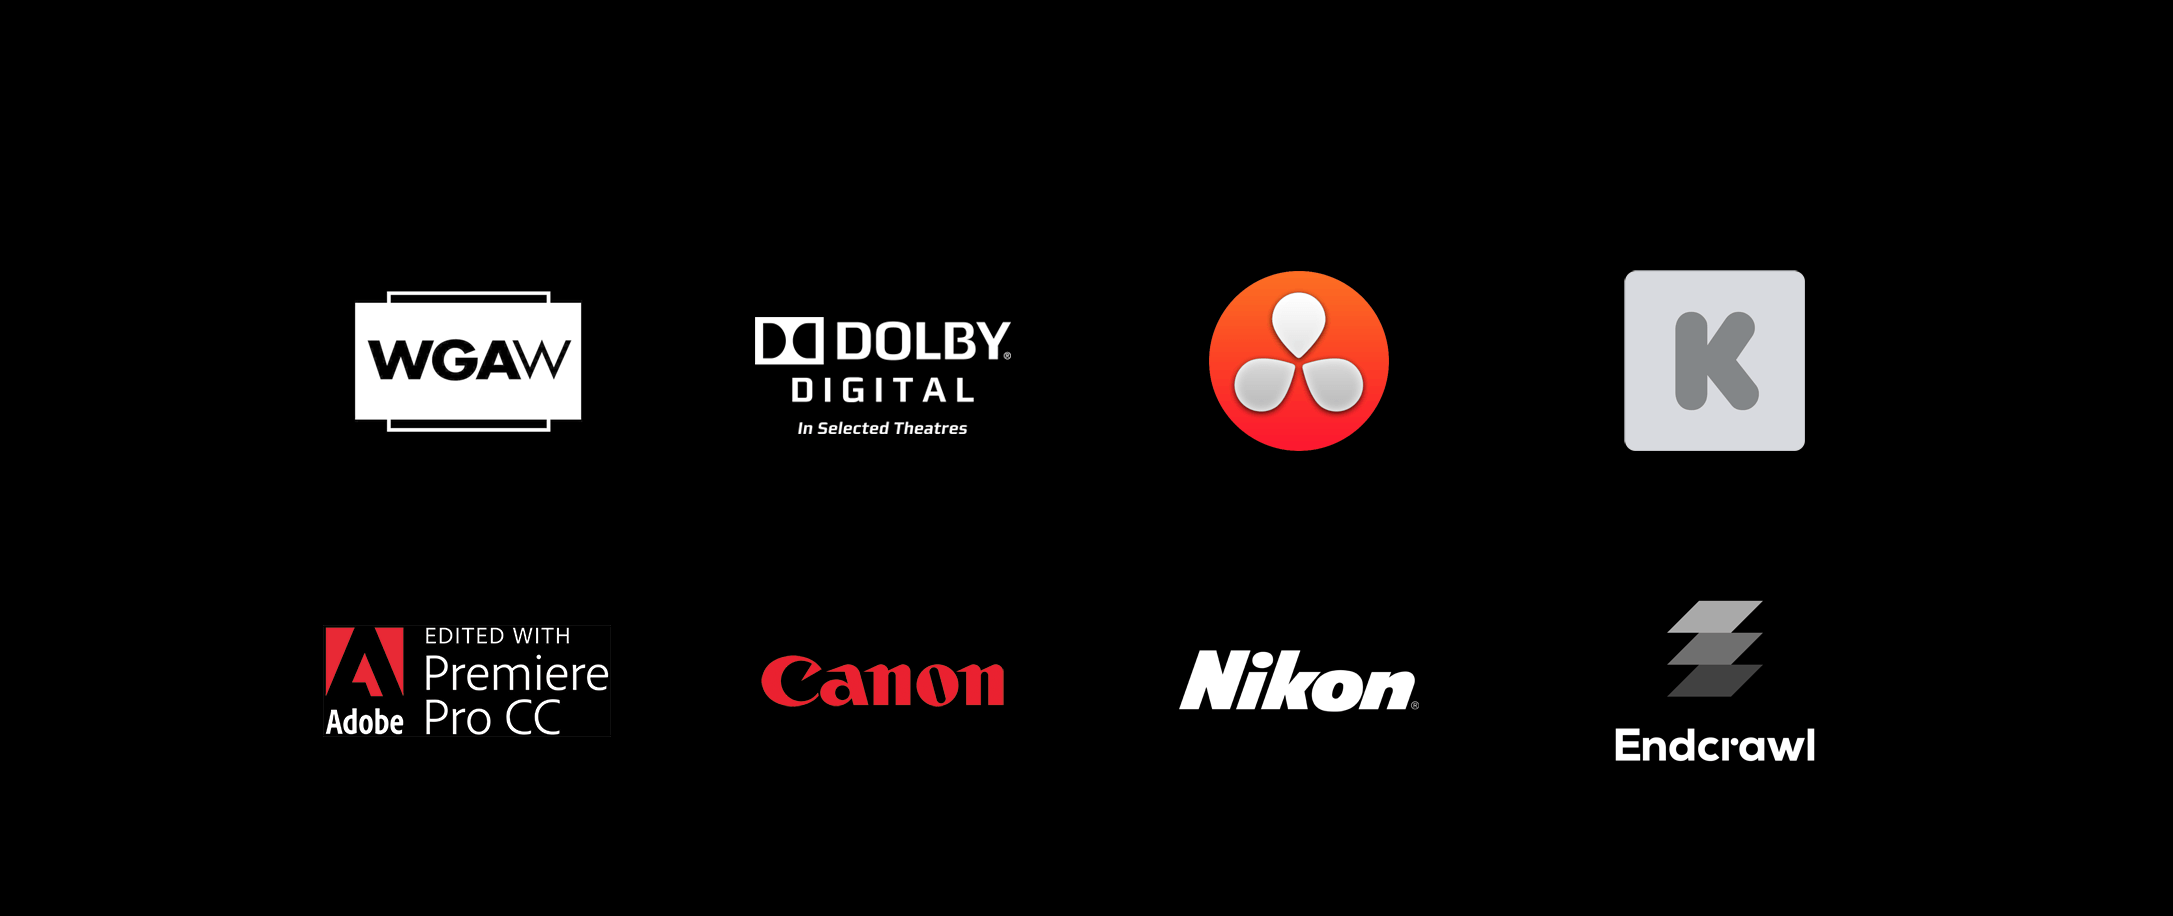 Dolby in Selected Theaters Logo - Shooting an Elephant